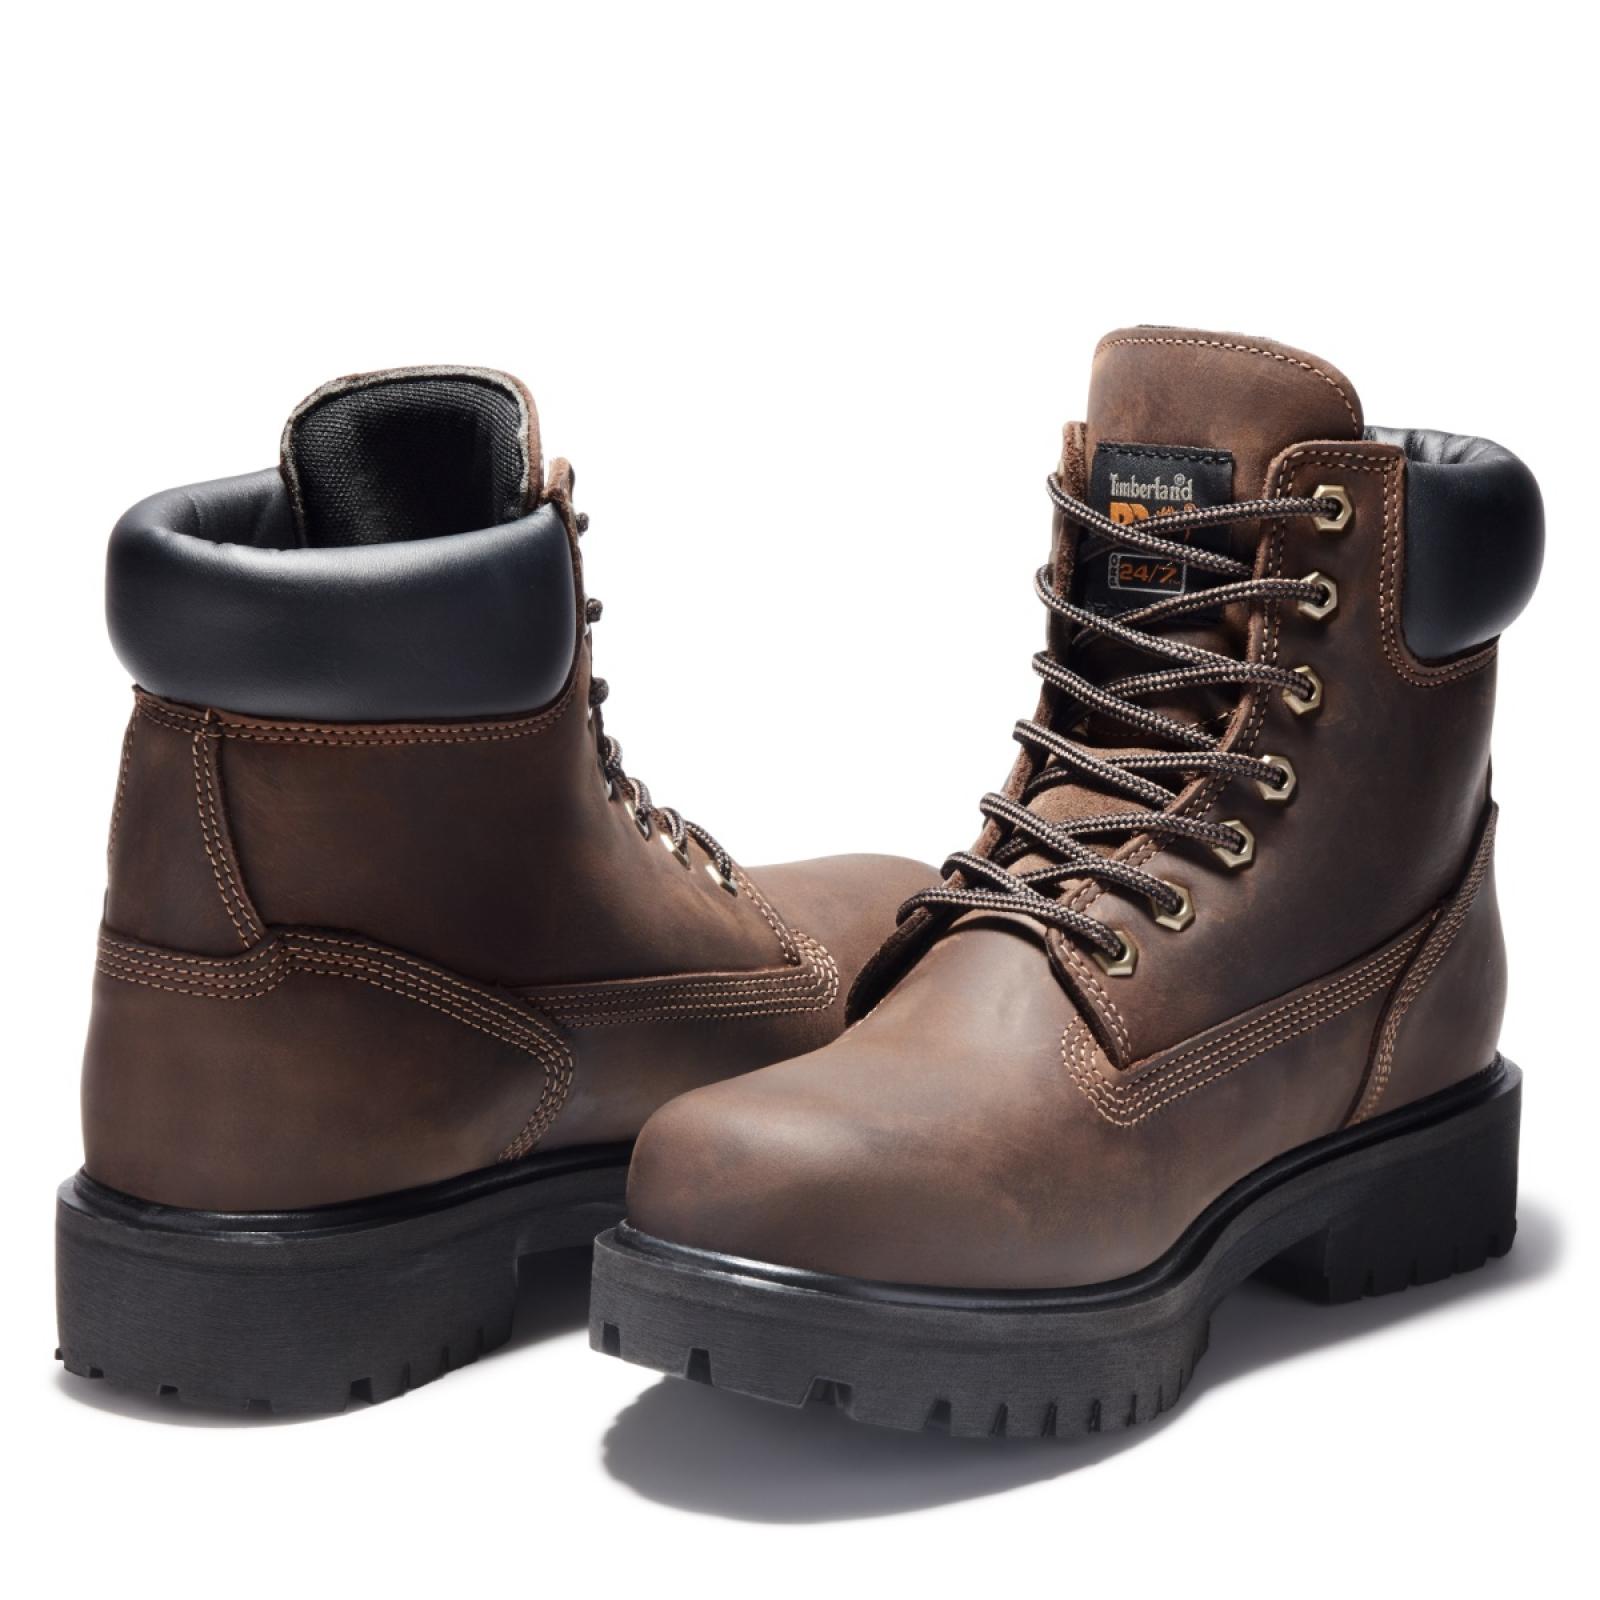 Timberland PRO Men's Direct Attach 6" Soft Toe Boots